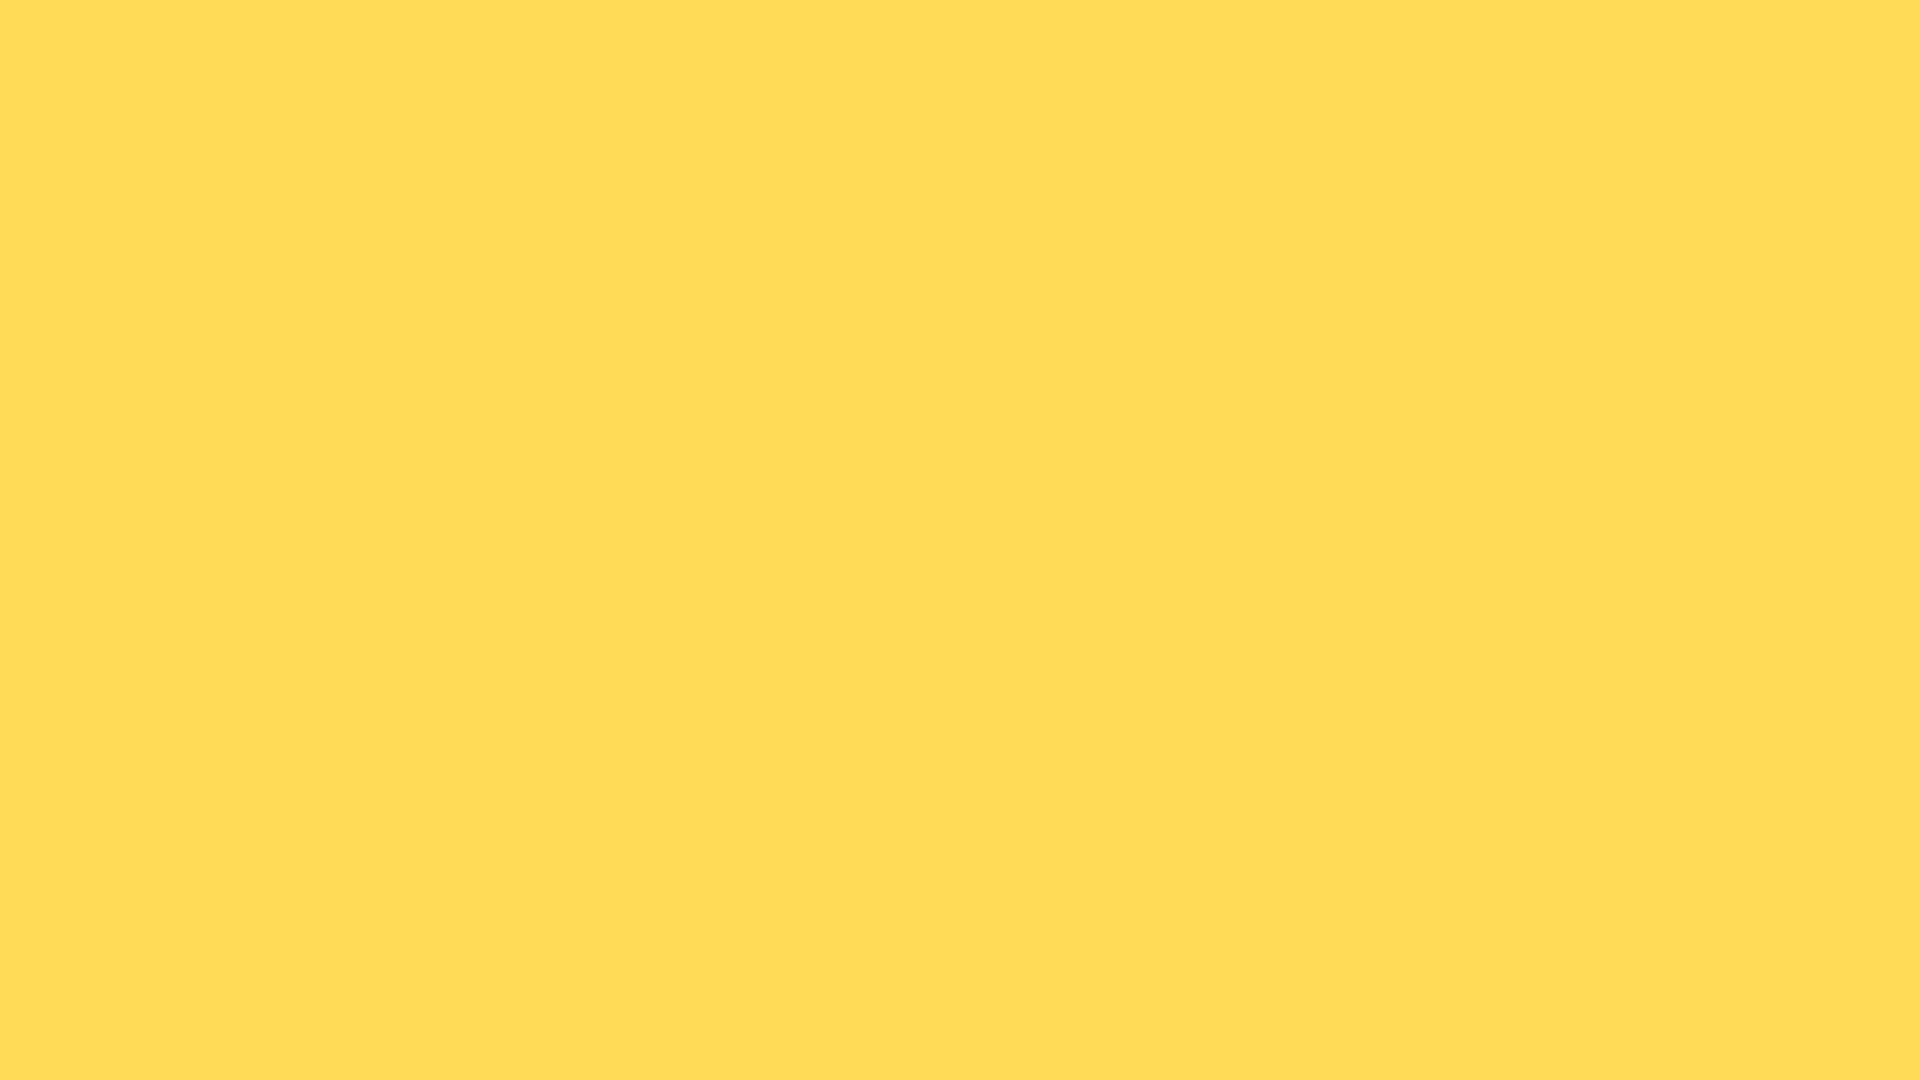 Mustard Yellow Color Solid Background 1920x1080 